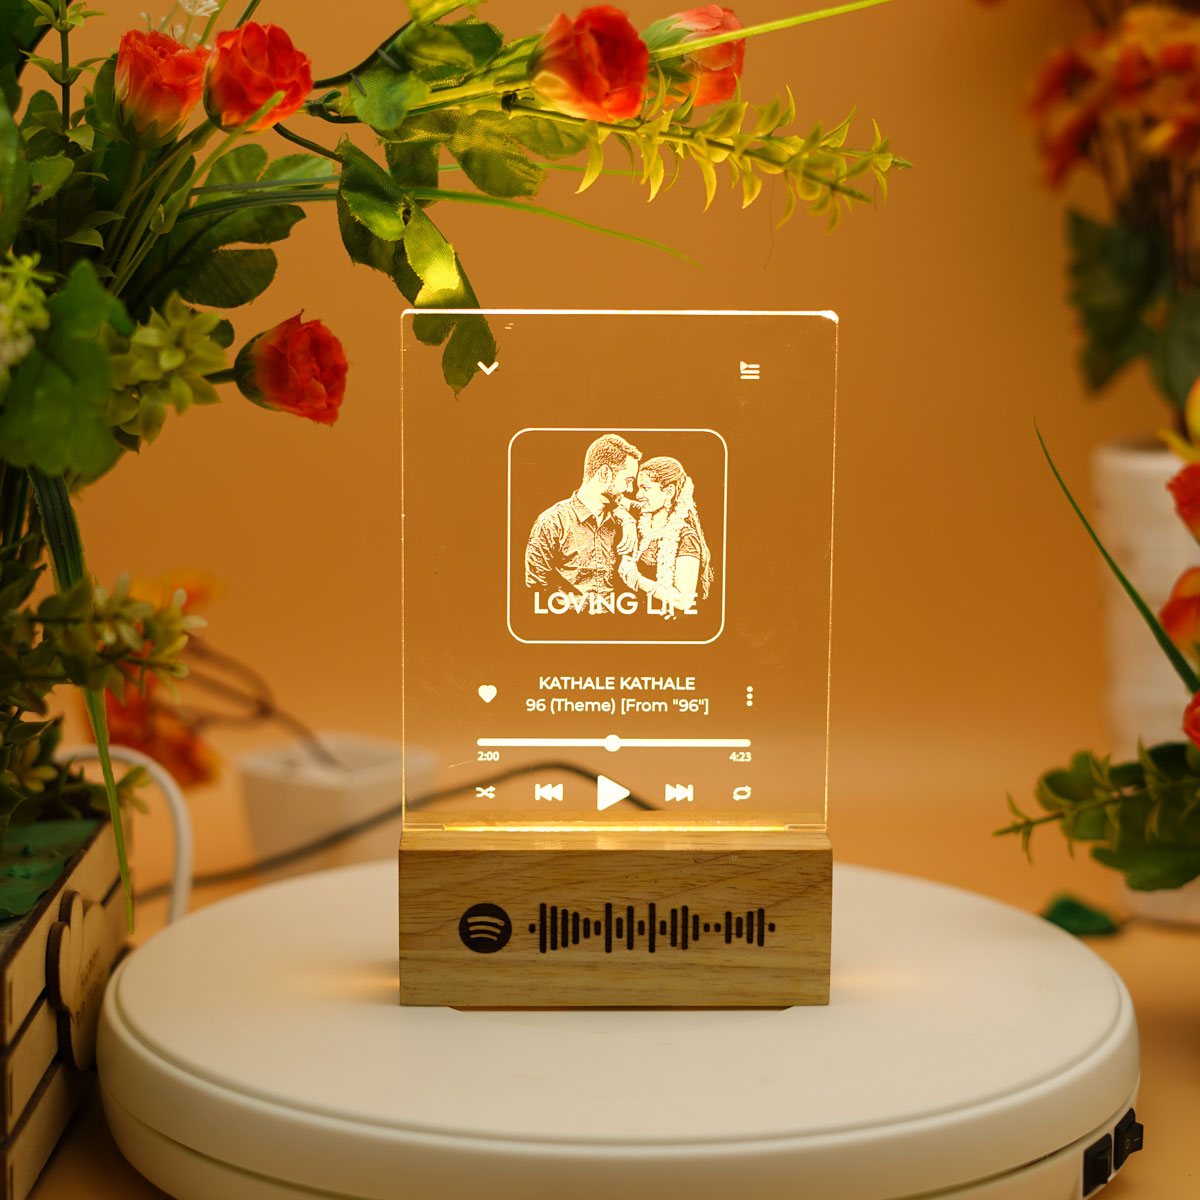 Spotify Photo Engraved Night lamp Gift